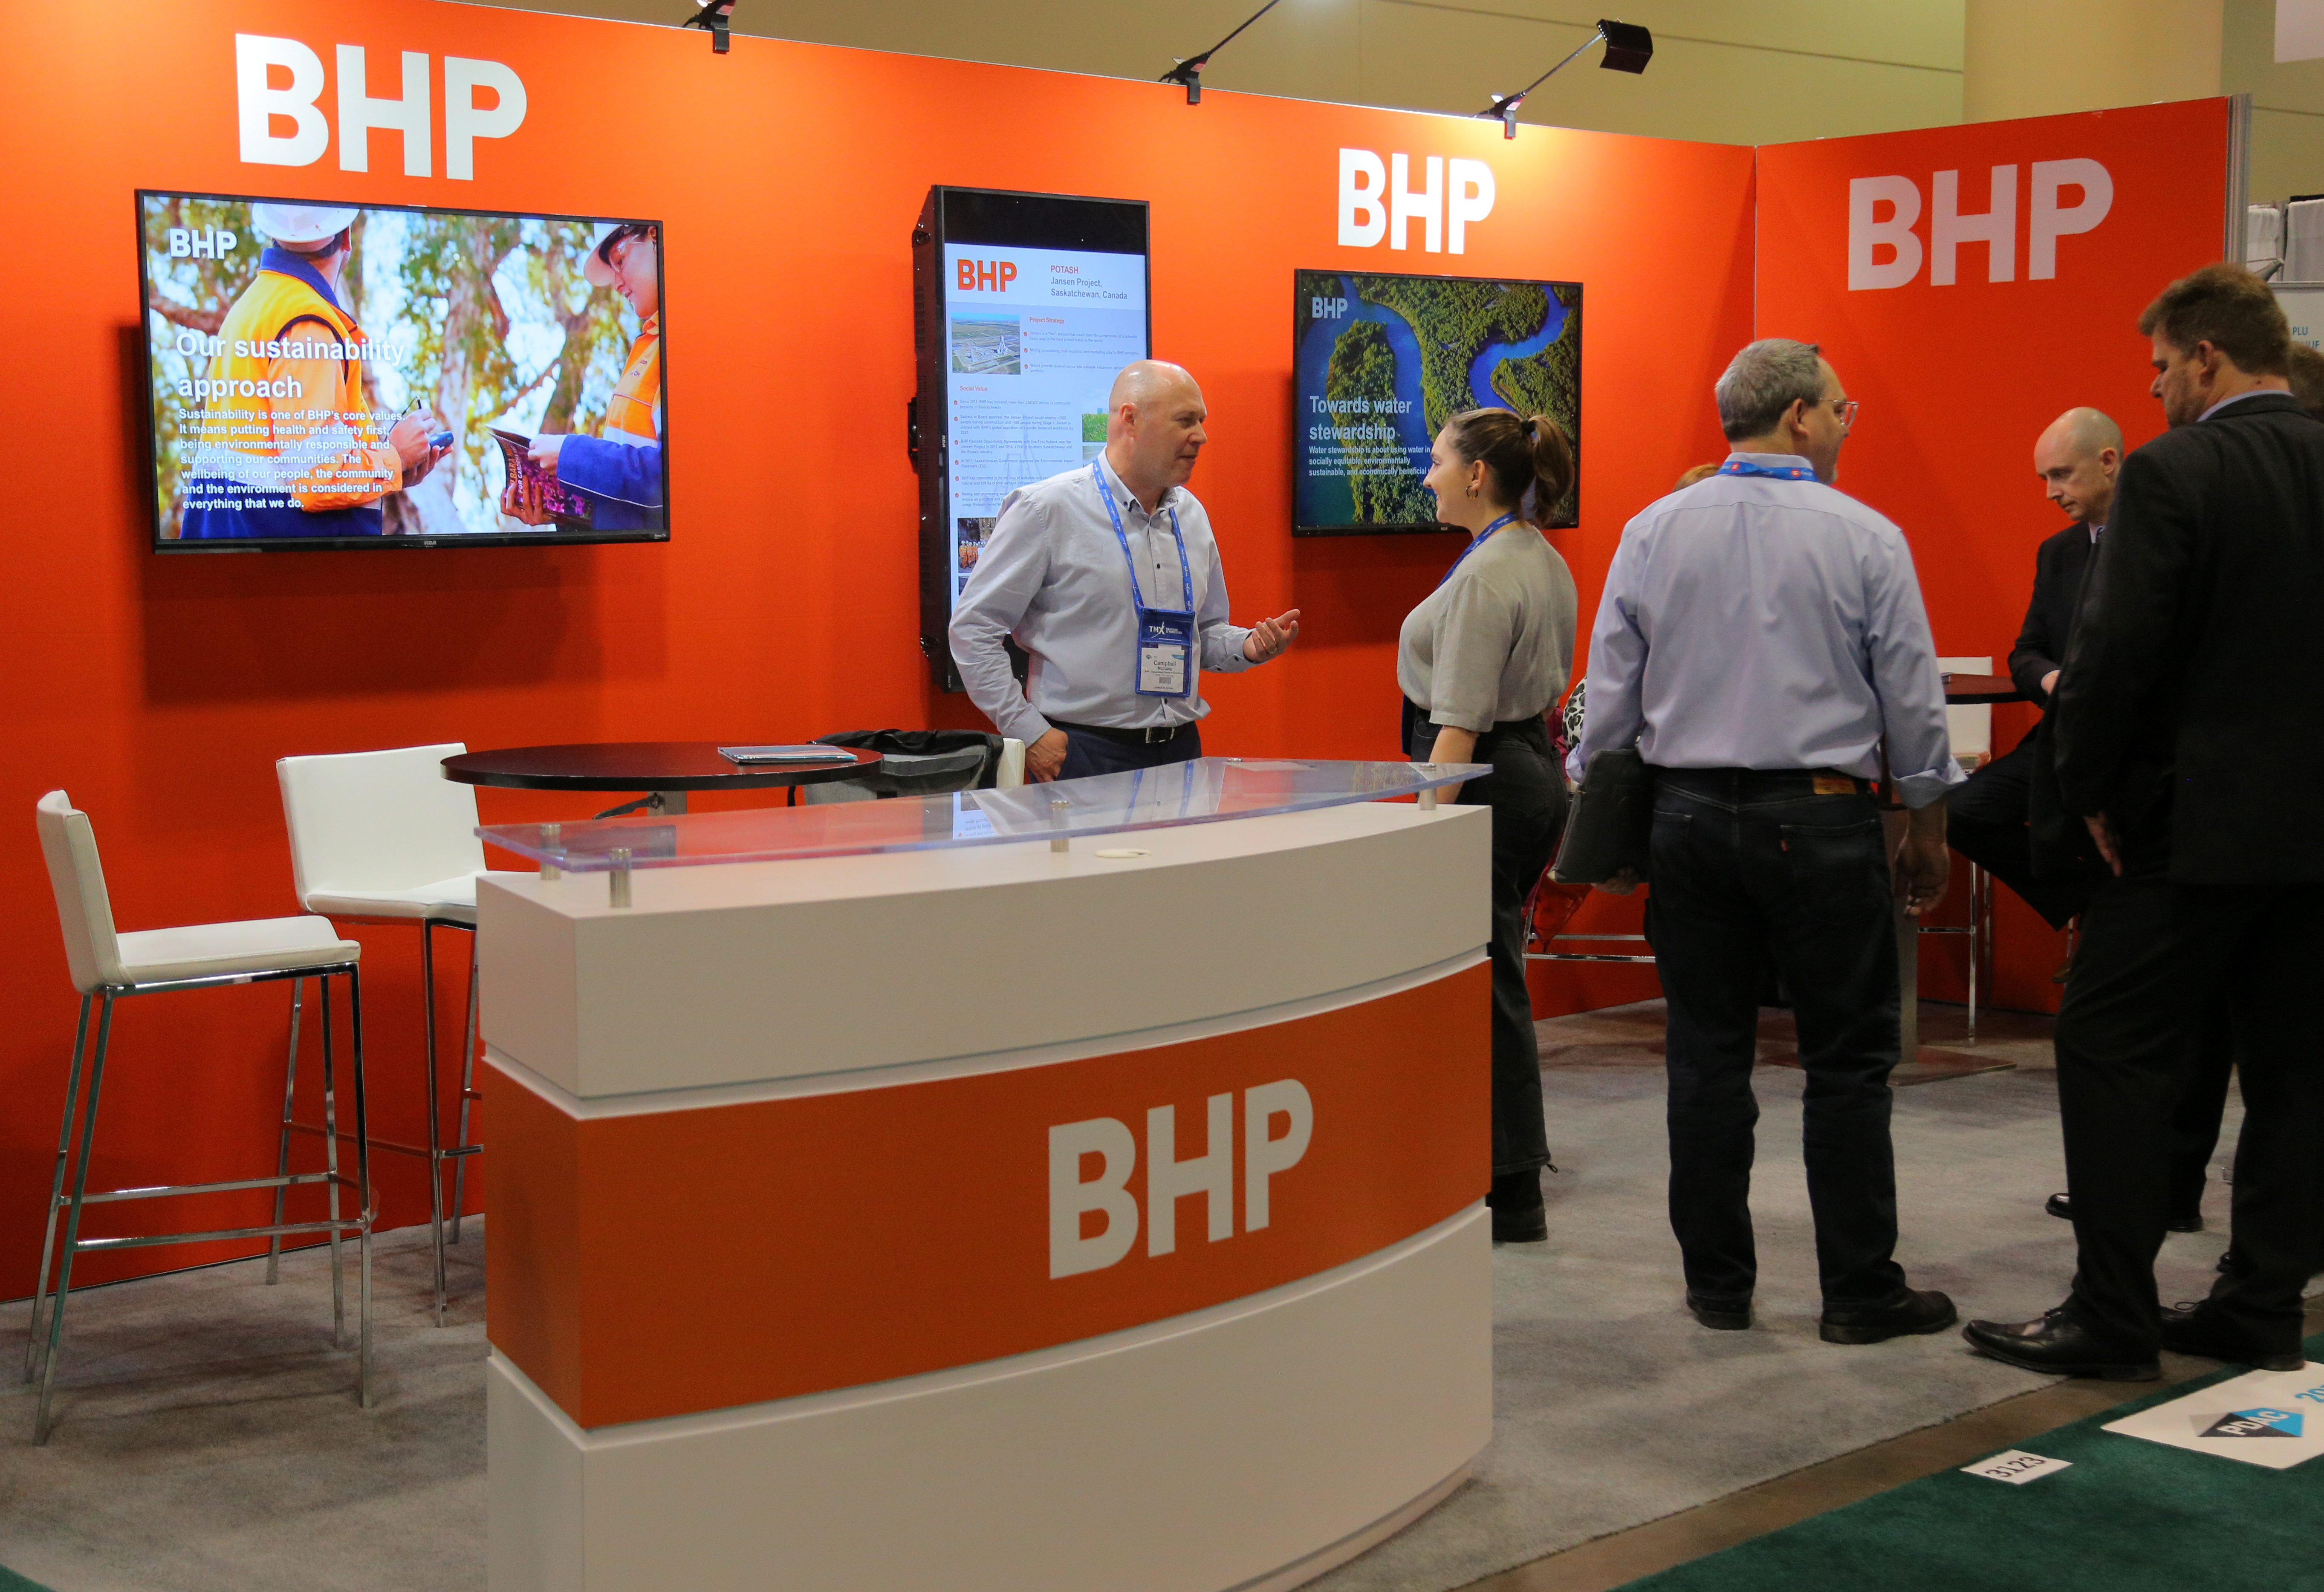 Visitors to the BHP (formerly known as BHP Billiton) booth speak with representatives during the Prospectors and Developers Association of Canada (PDAC) annual convention in Toronto, Ontario, Canada March 4, 2019. REUTERS/Chris Helgren